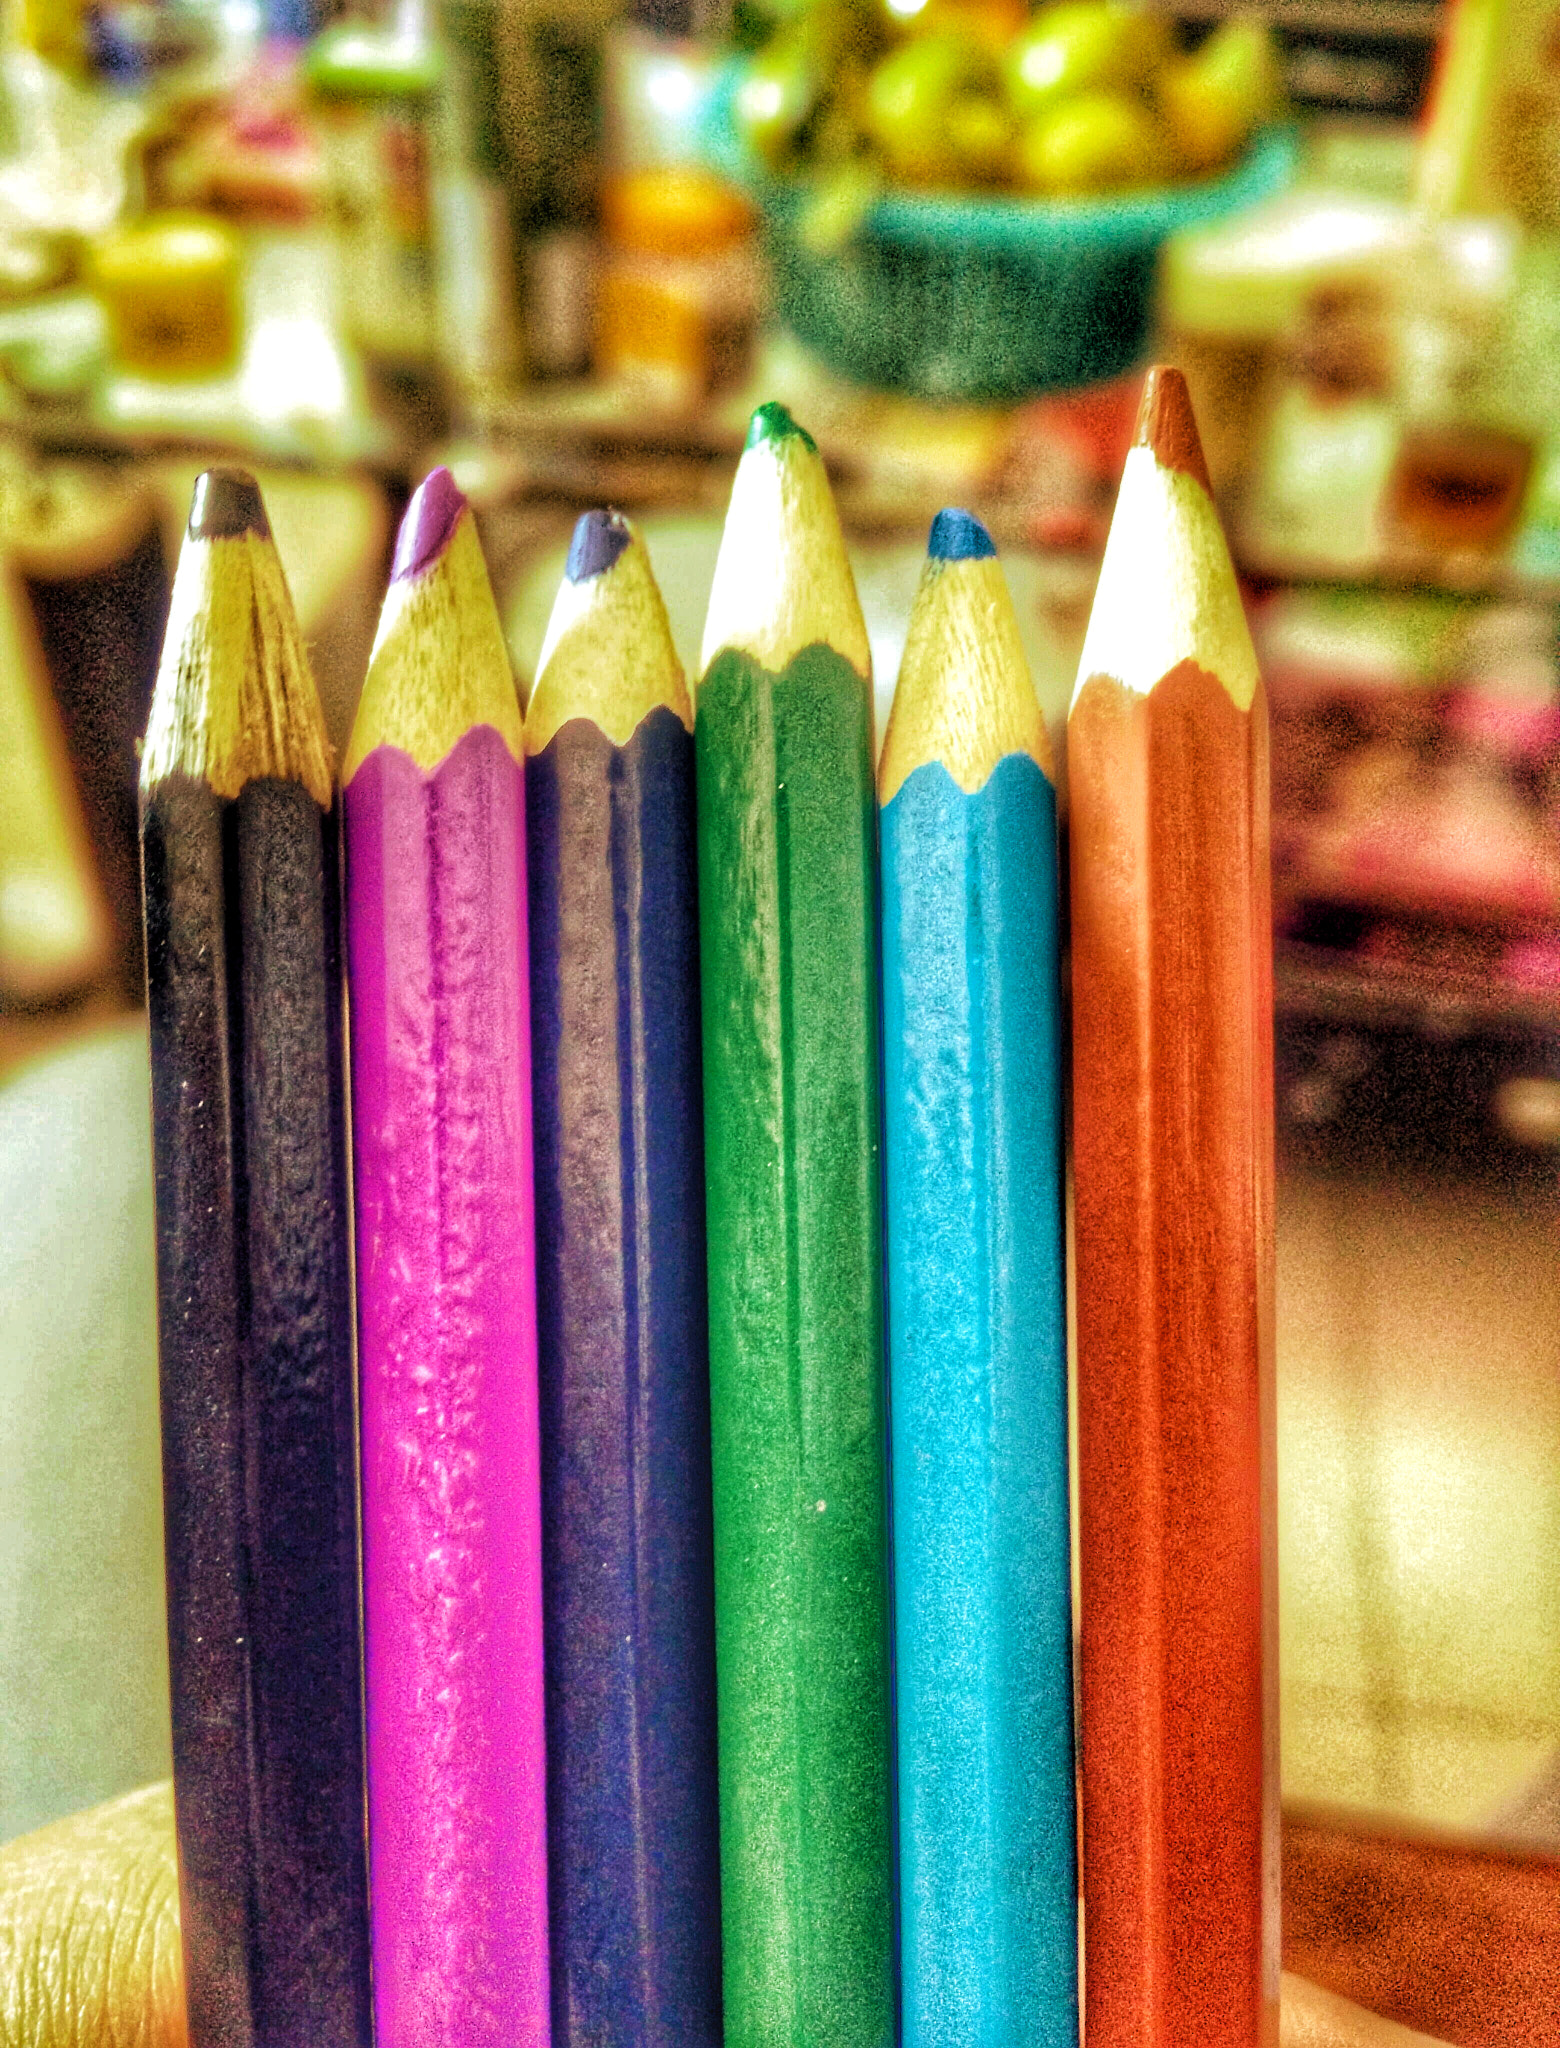 OPPO Find7 sample photo. Colorful pencils photography